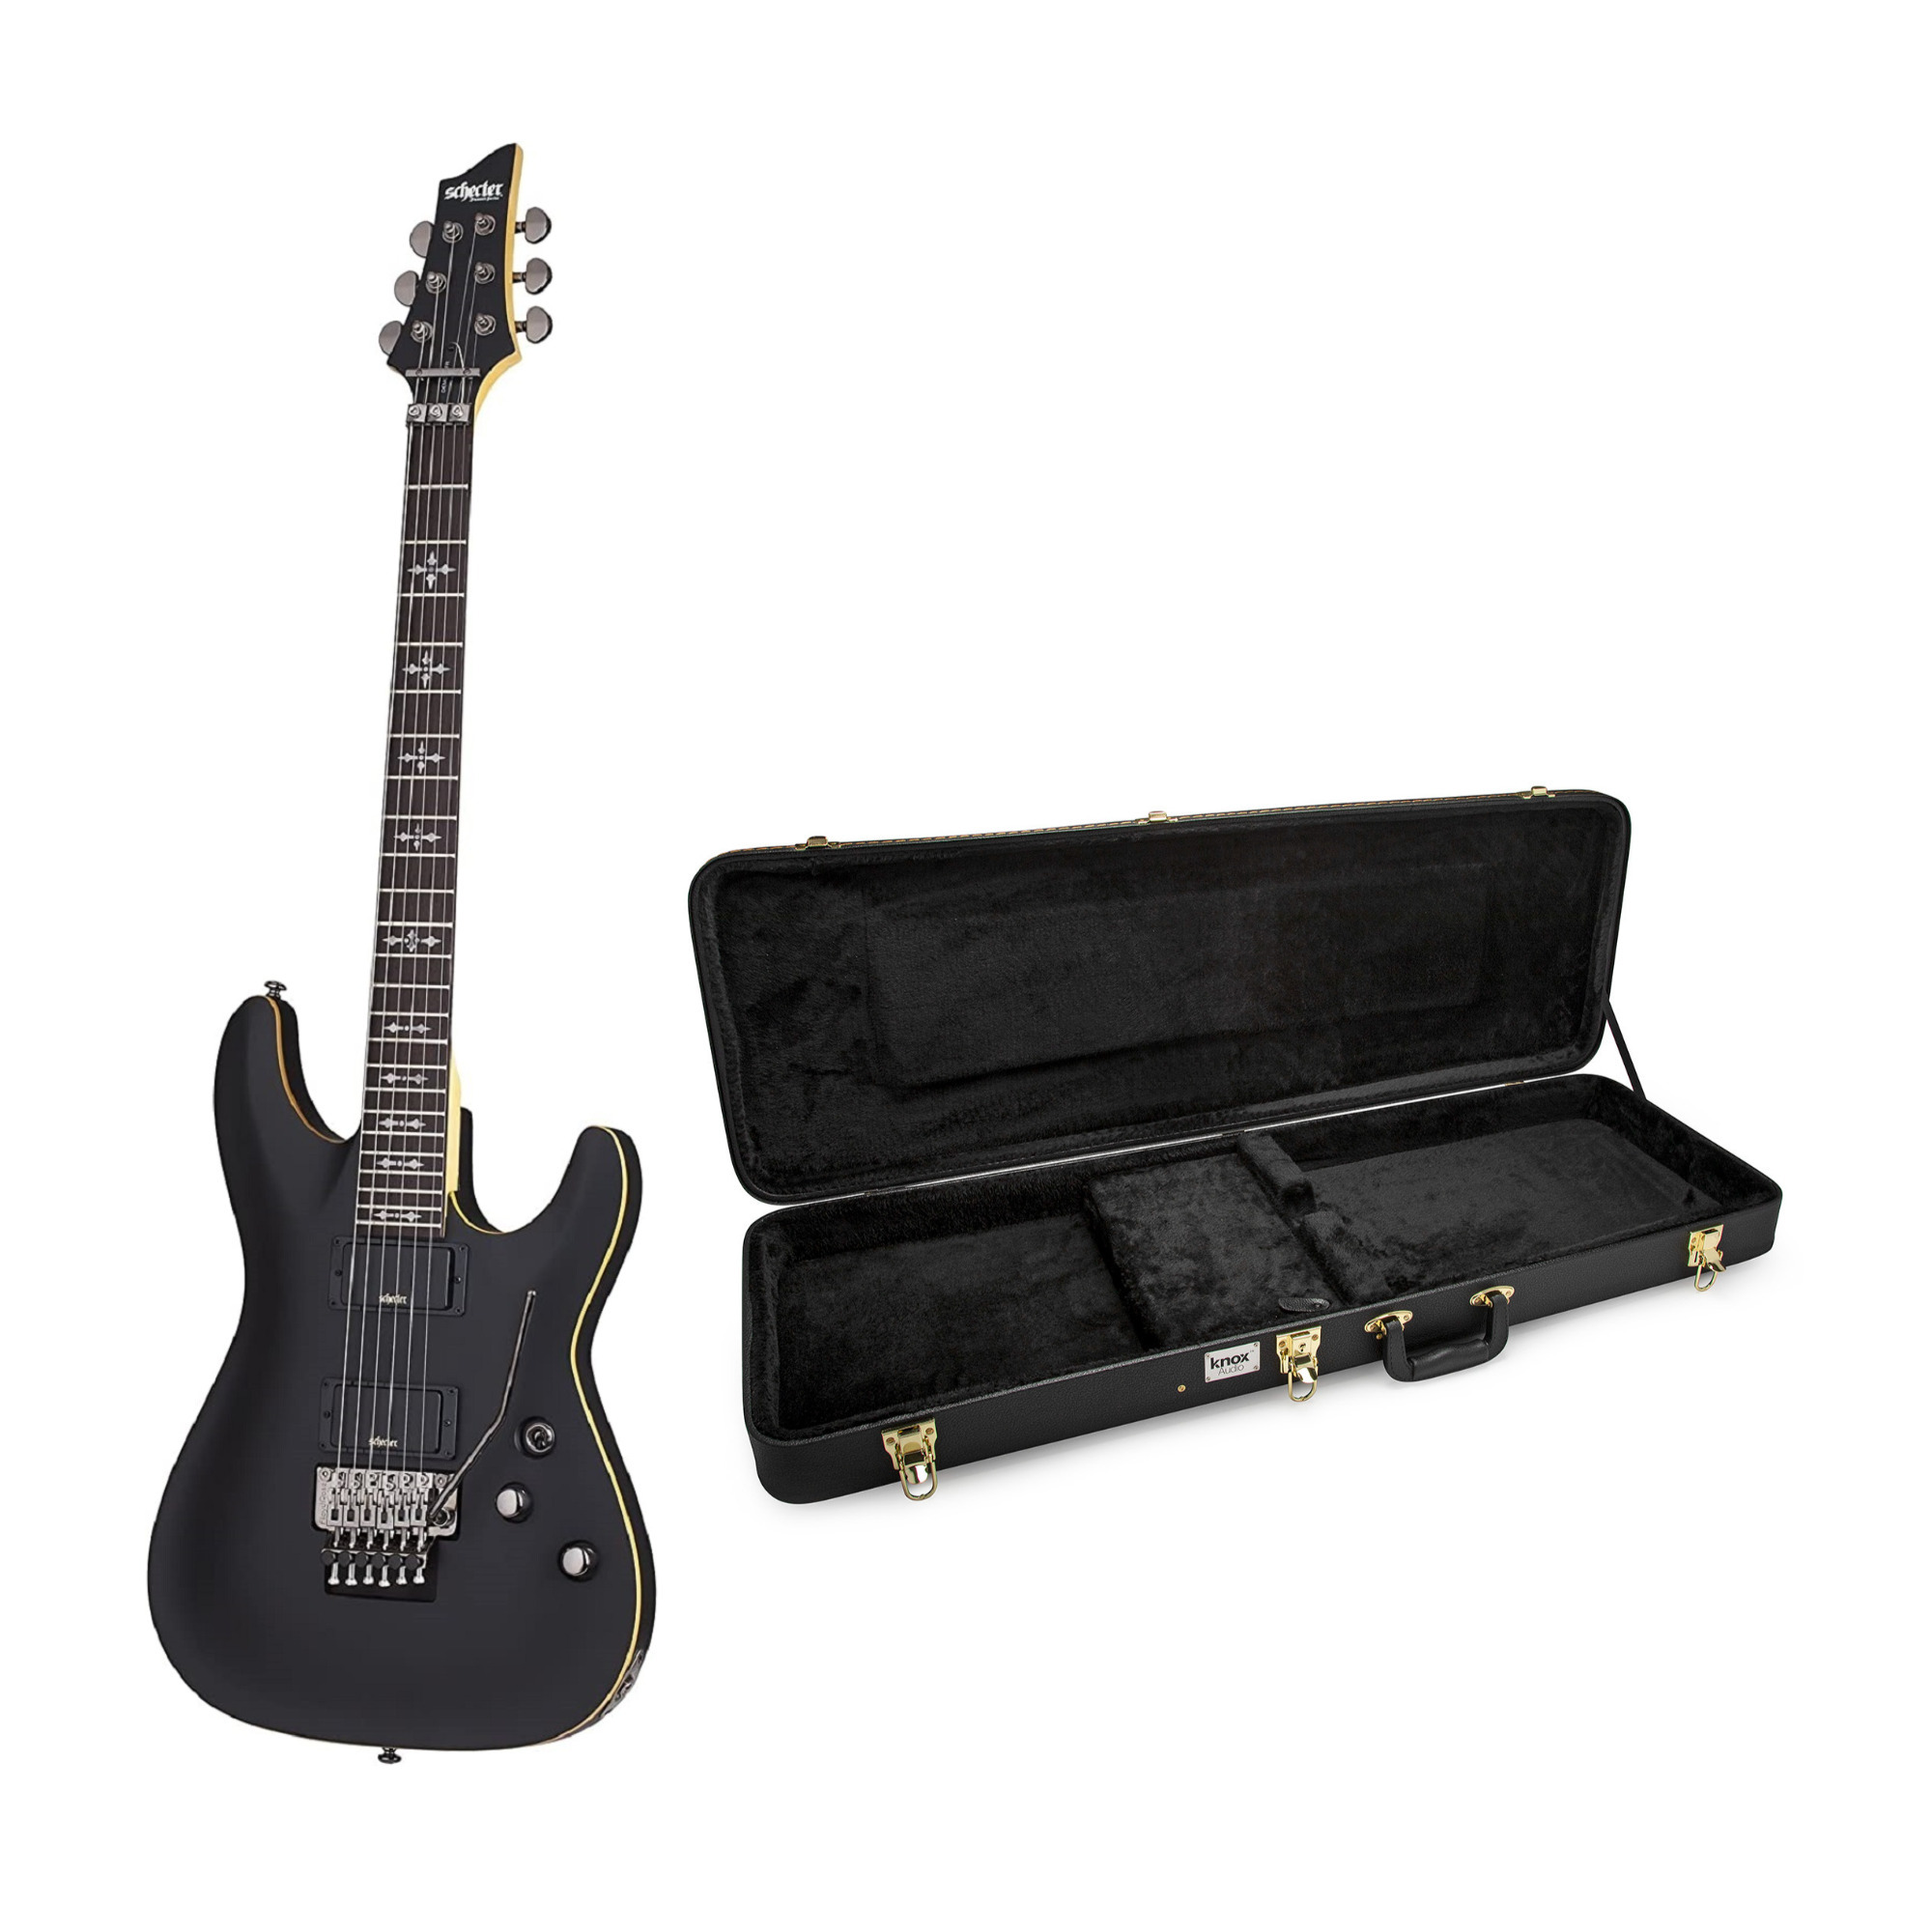 Schecter Demon-6 FR Electric Guitar in Aged Black Satin with Electric Guitar Hard Shell Case -  ASGR-3661K1